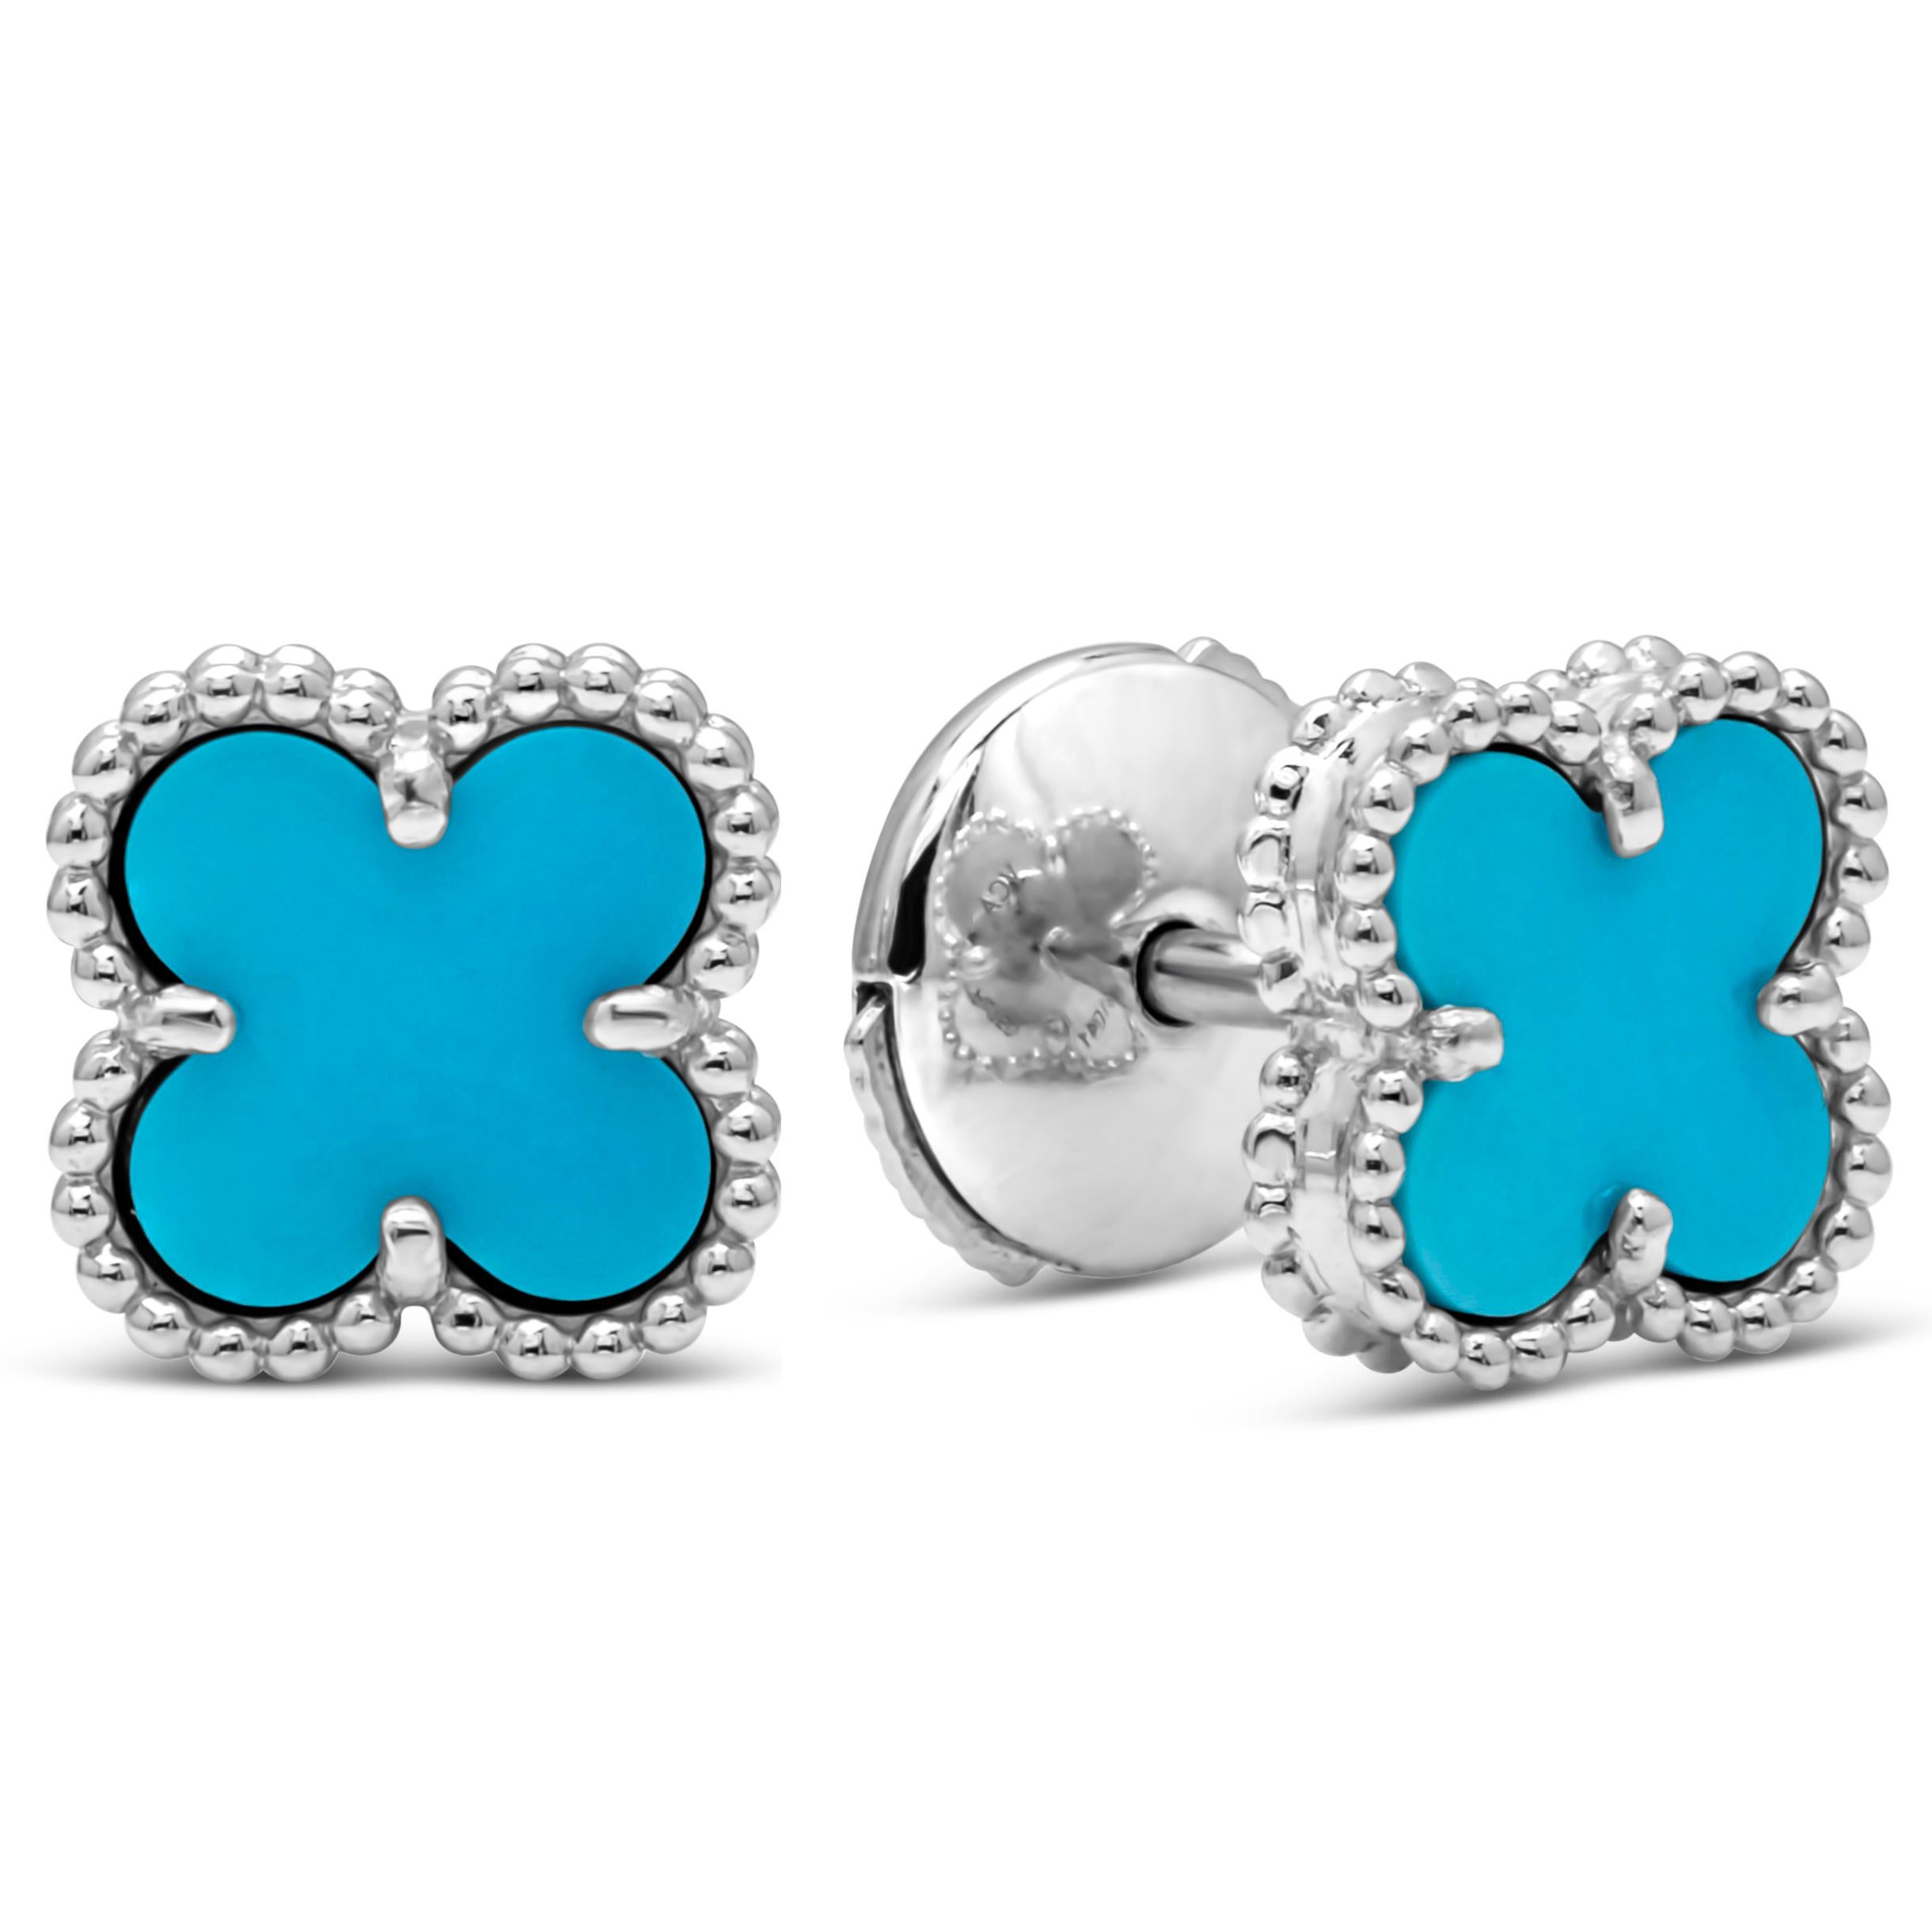 Showcasing a classic & unique sweet Alhambra turquoise stud earrings set in a four prong 18k white gold halo clover design.
Comes with original box.